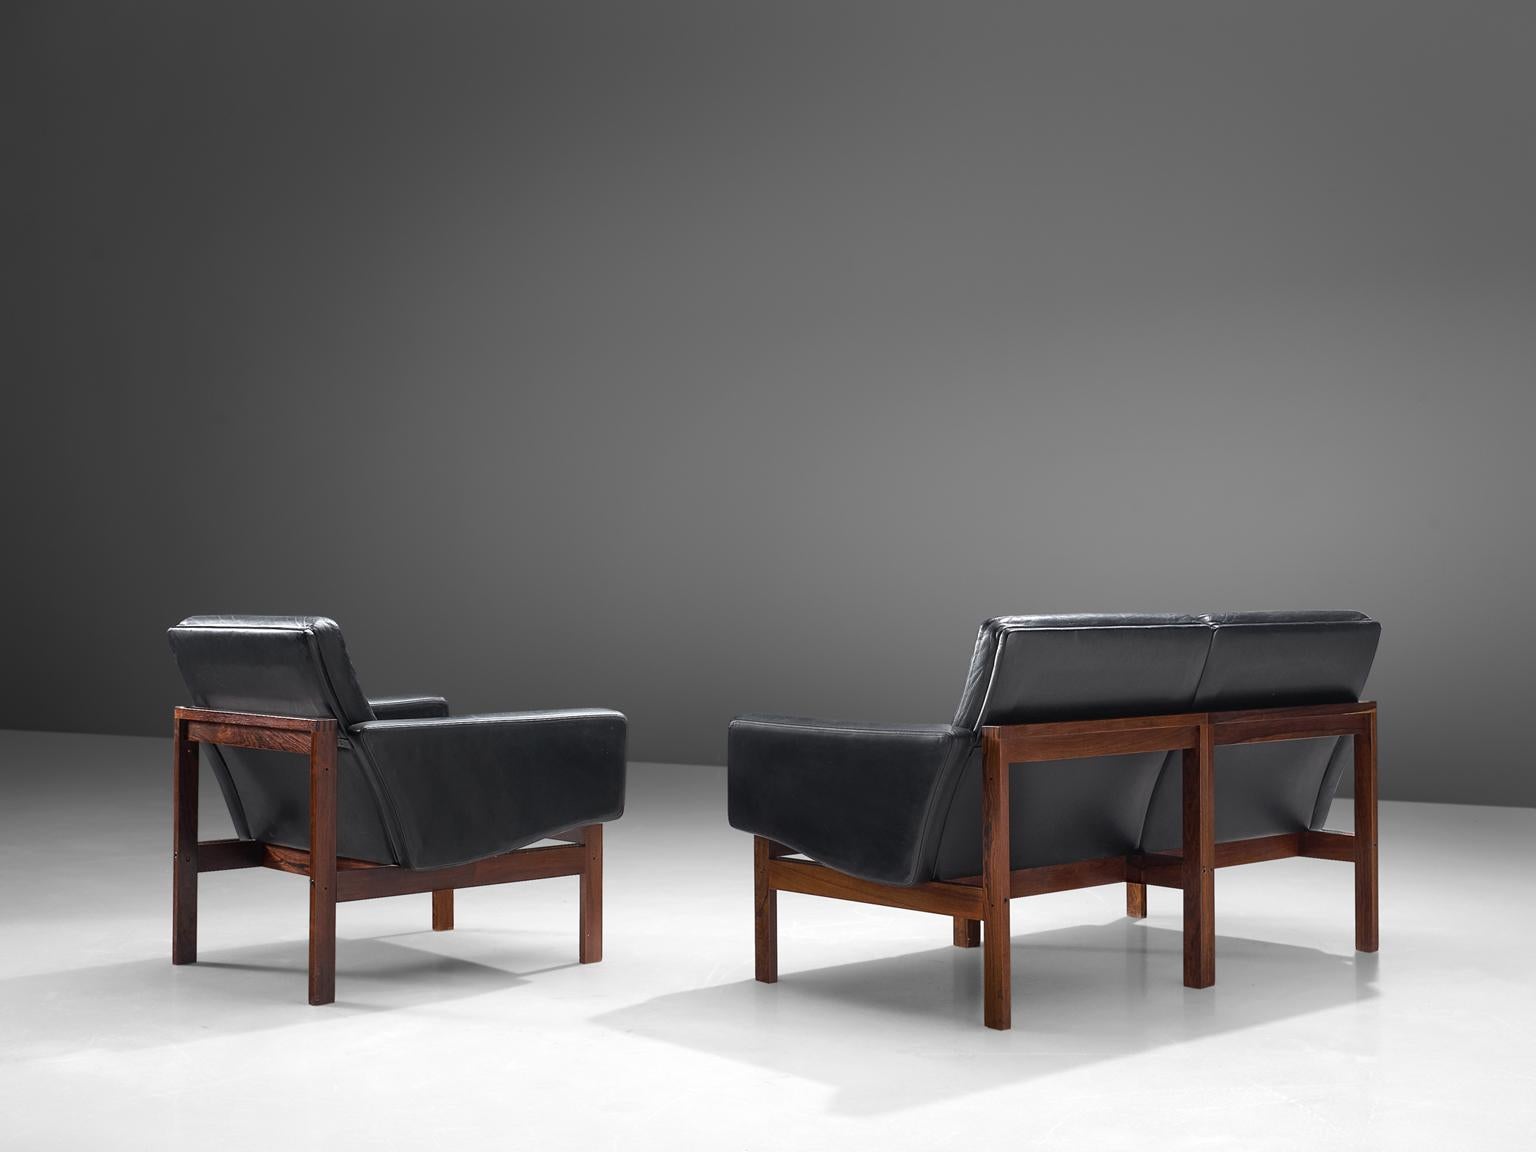 Ole Gjerløv-Knudsen for France & Son, living room set, Denmark, 1962.

This chair and sofa form an extraordinary stately set, being both crisp and warm at the same time. The teak frame holds a black leather body with buttoned cushions. The original